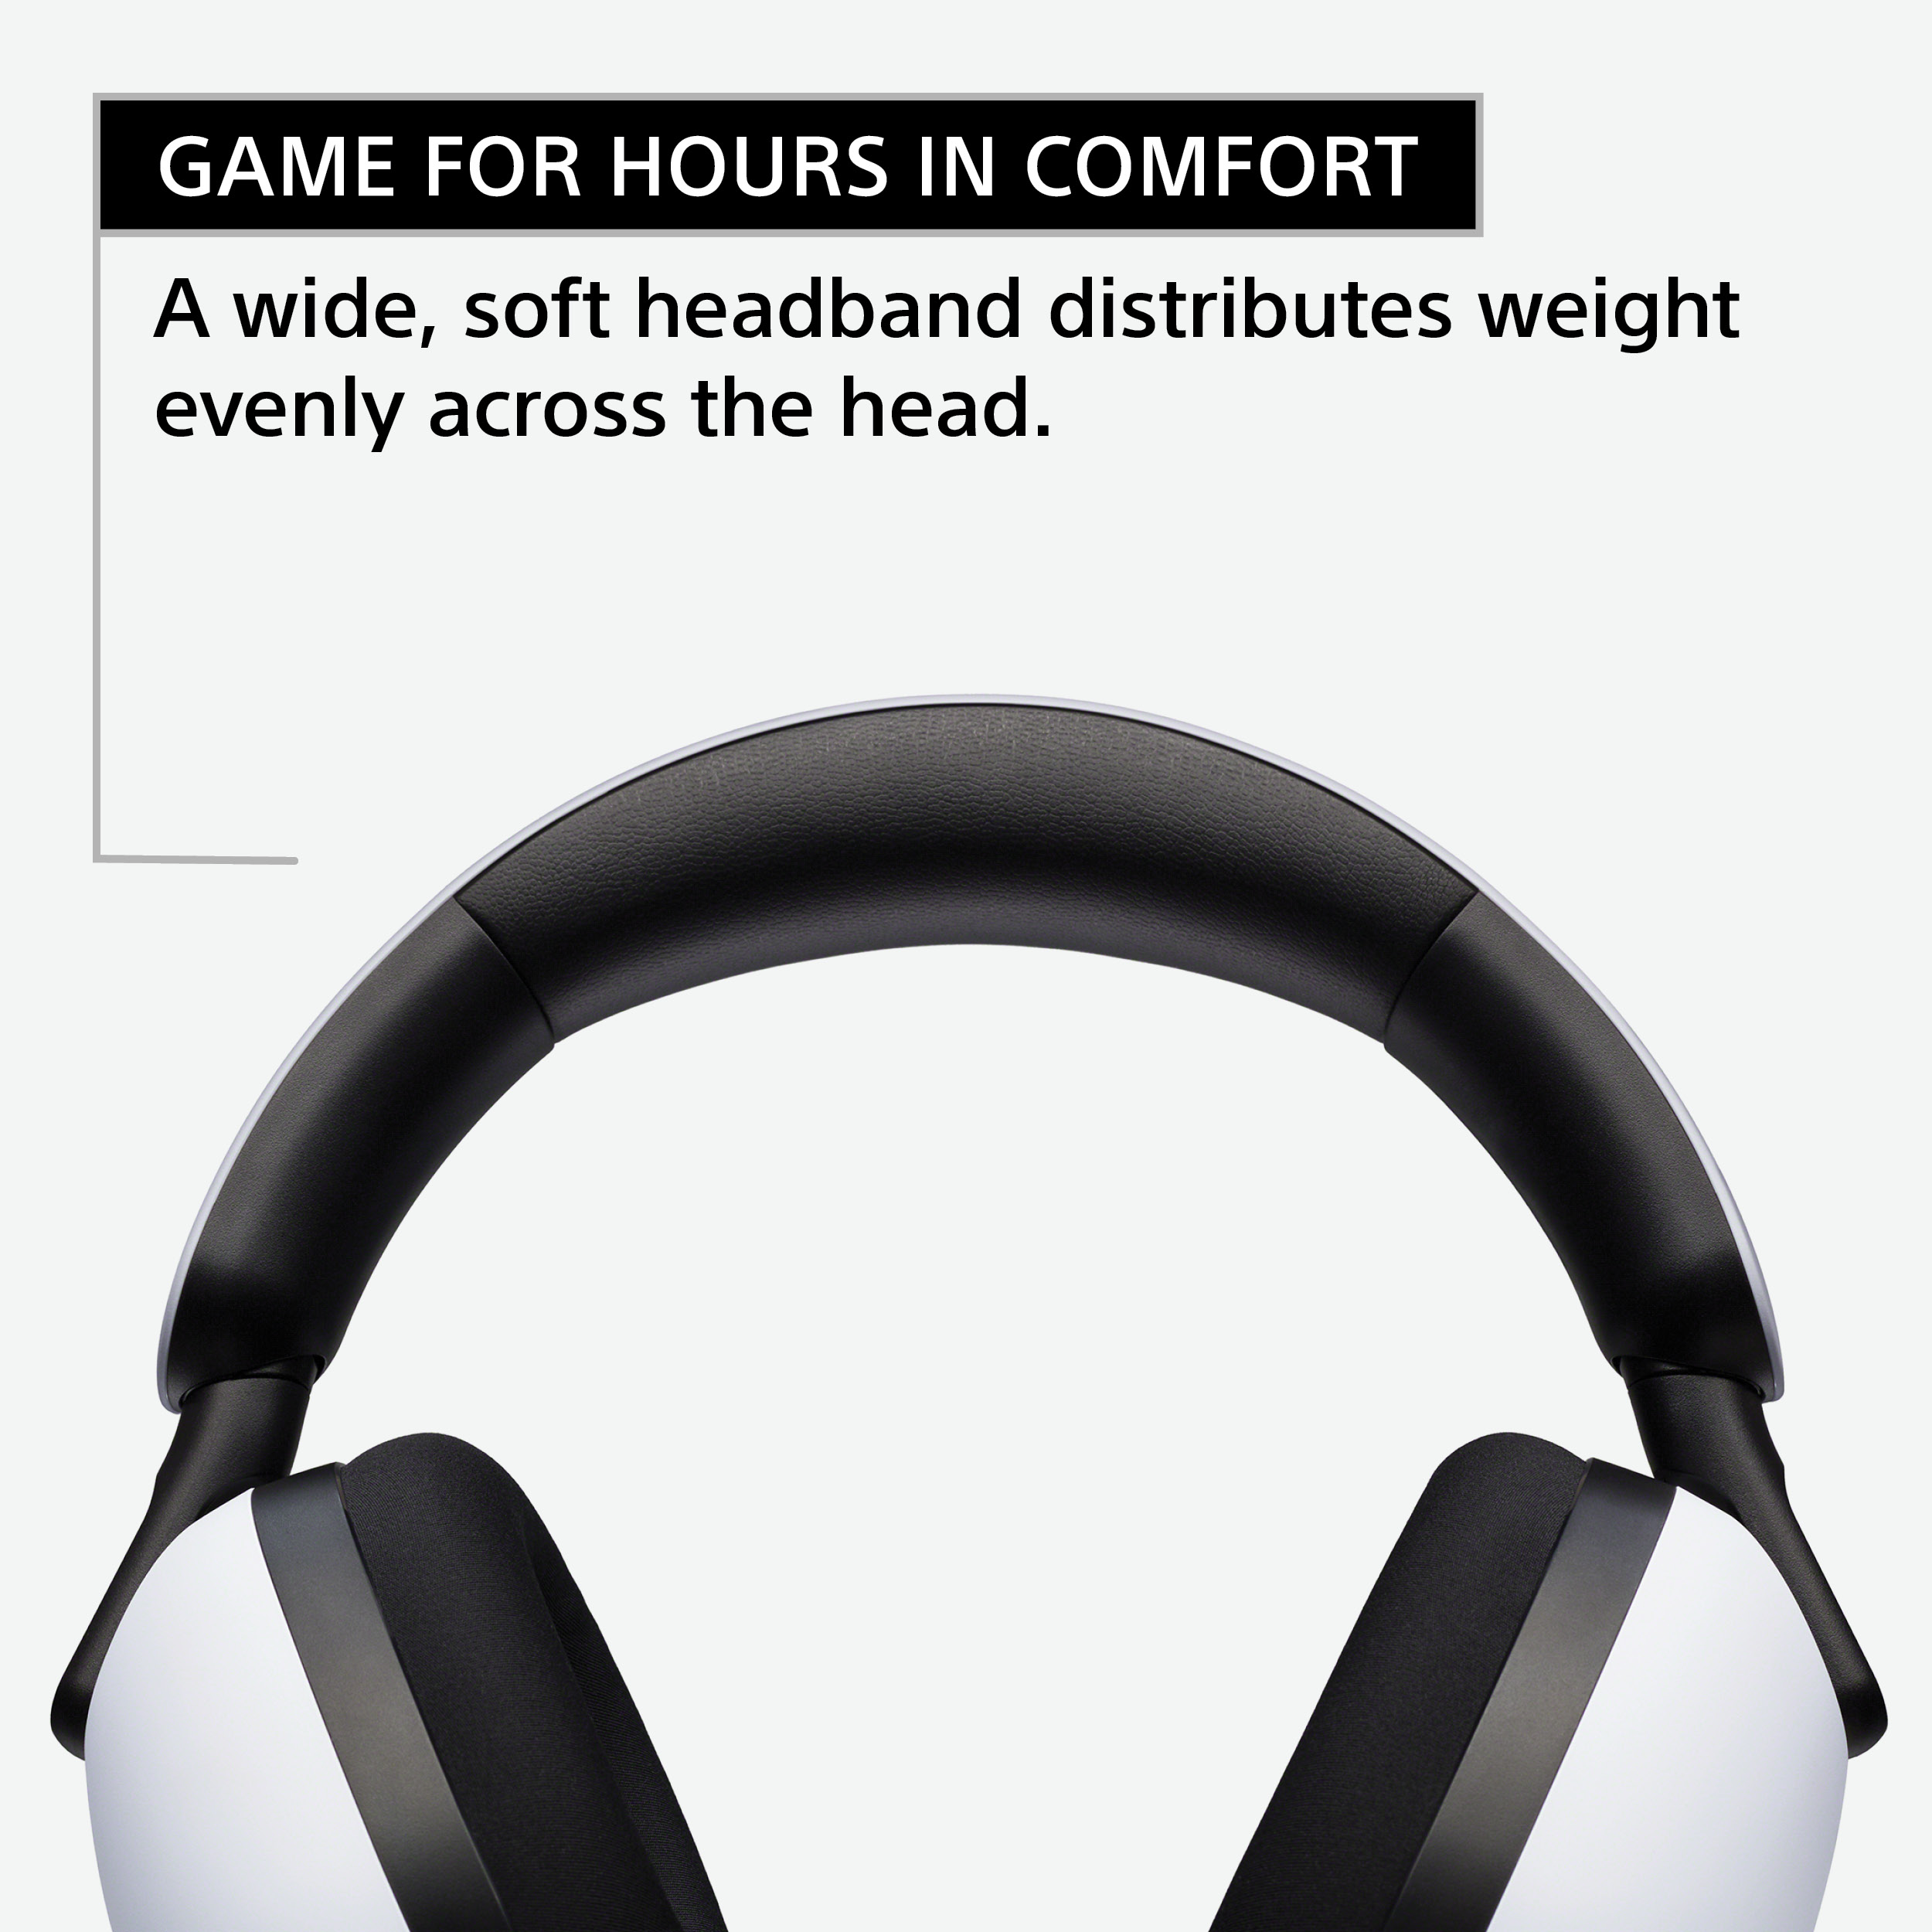 Sony INZONE H7 Wireless Gaming Headset, Over-Ear Headphones with 360 Spatial Sound, WH-G700 - image 3 of 14